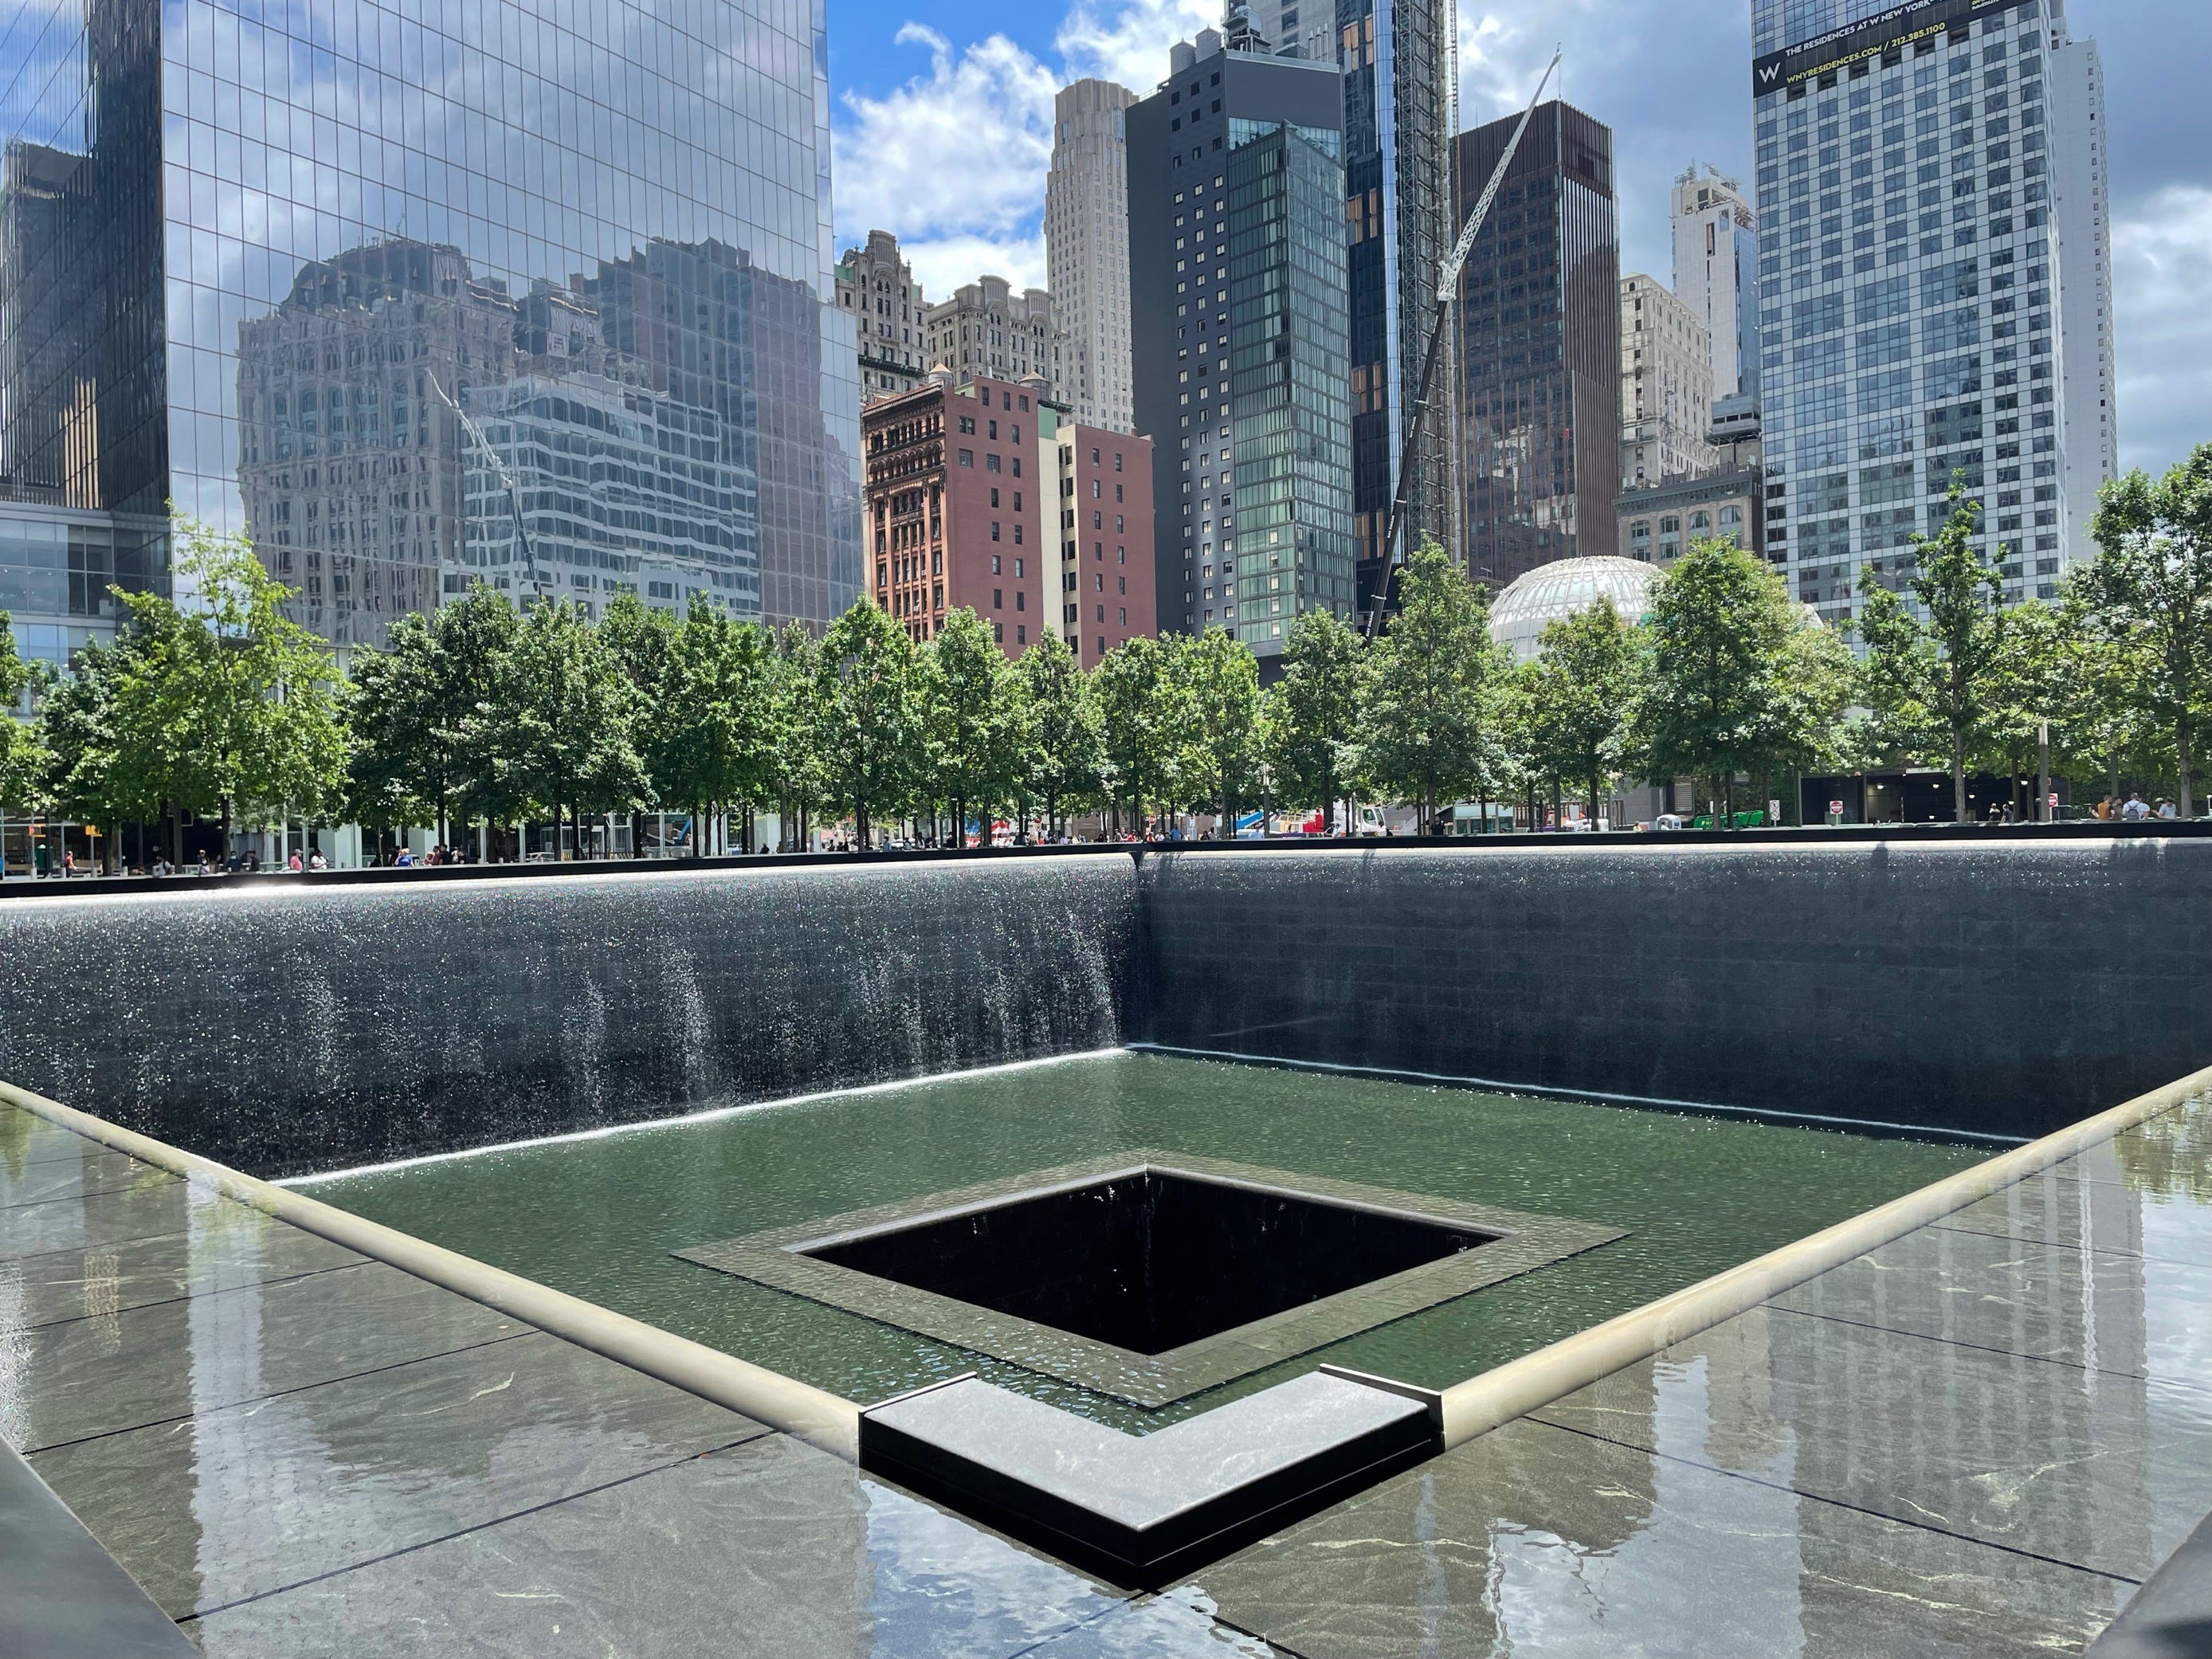 A memorial in the place where the World Trade Center twin towers once stood.